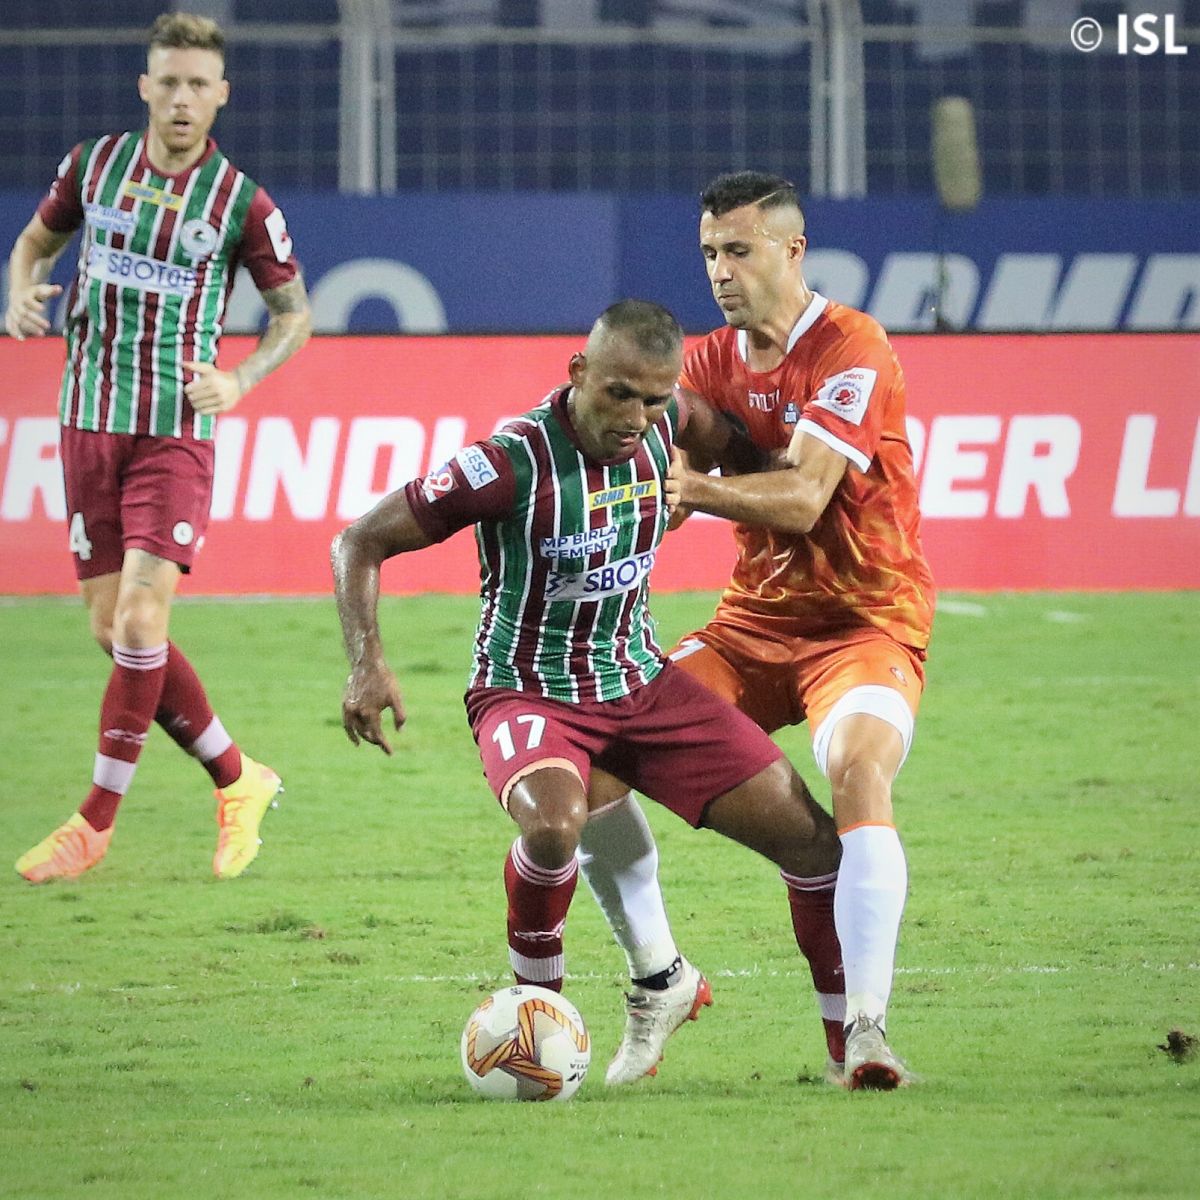 Action from the ISL match played between East Bengal and FC Goa